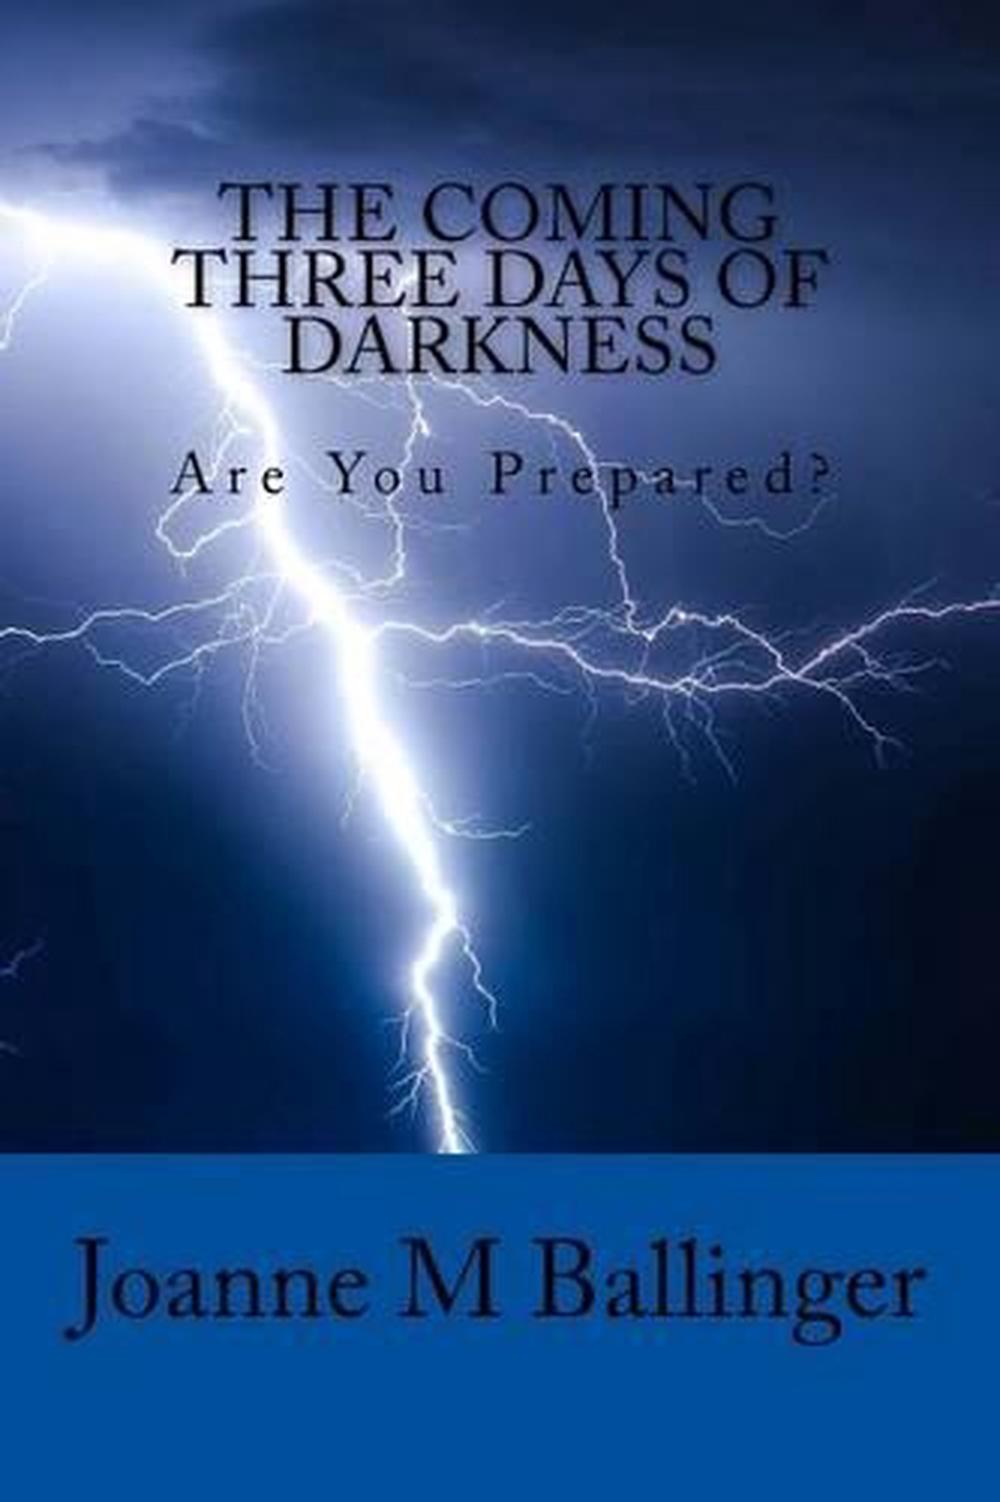 The Coming Three Days of Darkness by Joanne M. Ballinger (English